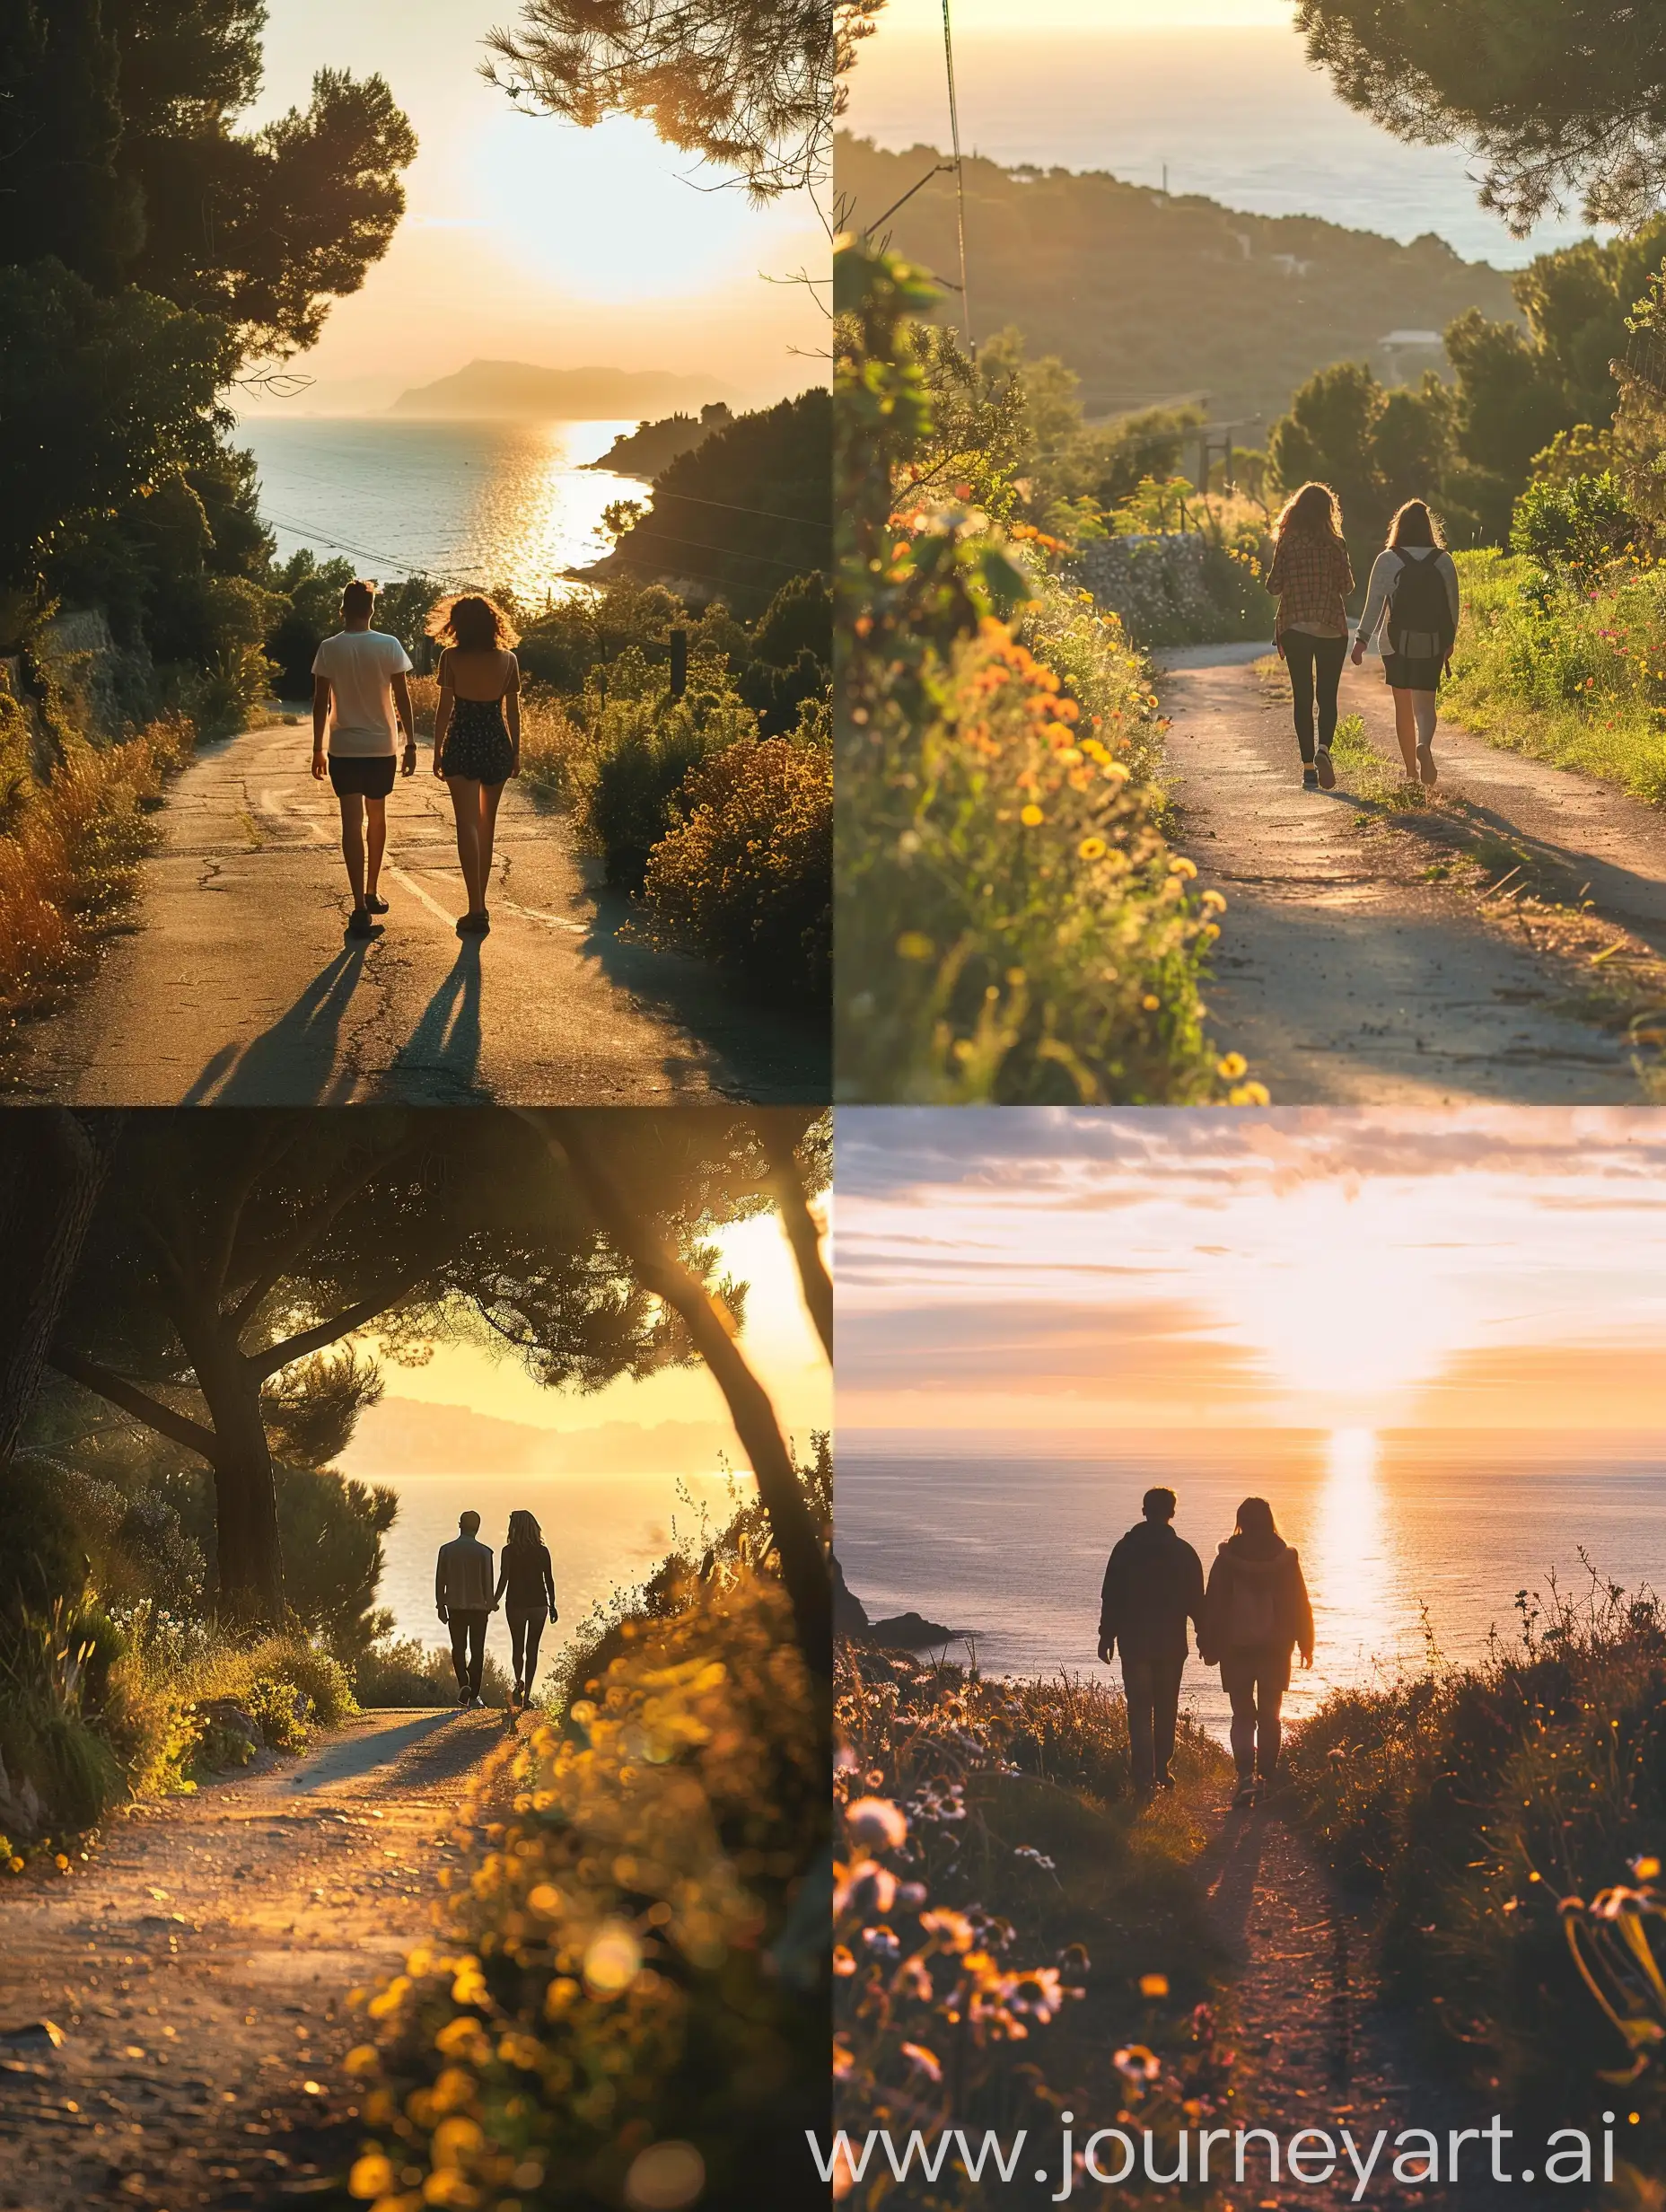 a photo of two people walking from their backs while discussing, such as accompaniment, mentoring, professional exchanges, on a country road towards the sea with the sun, banks of flowers trees  